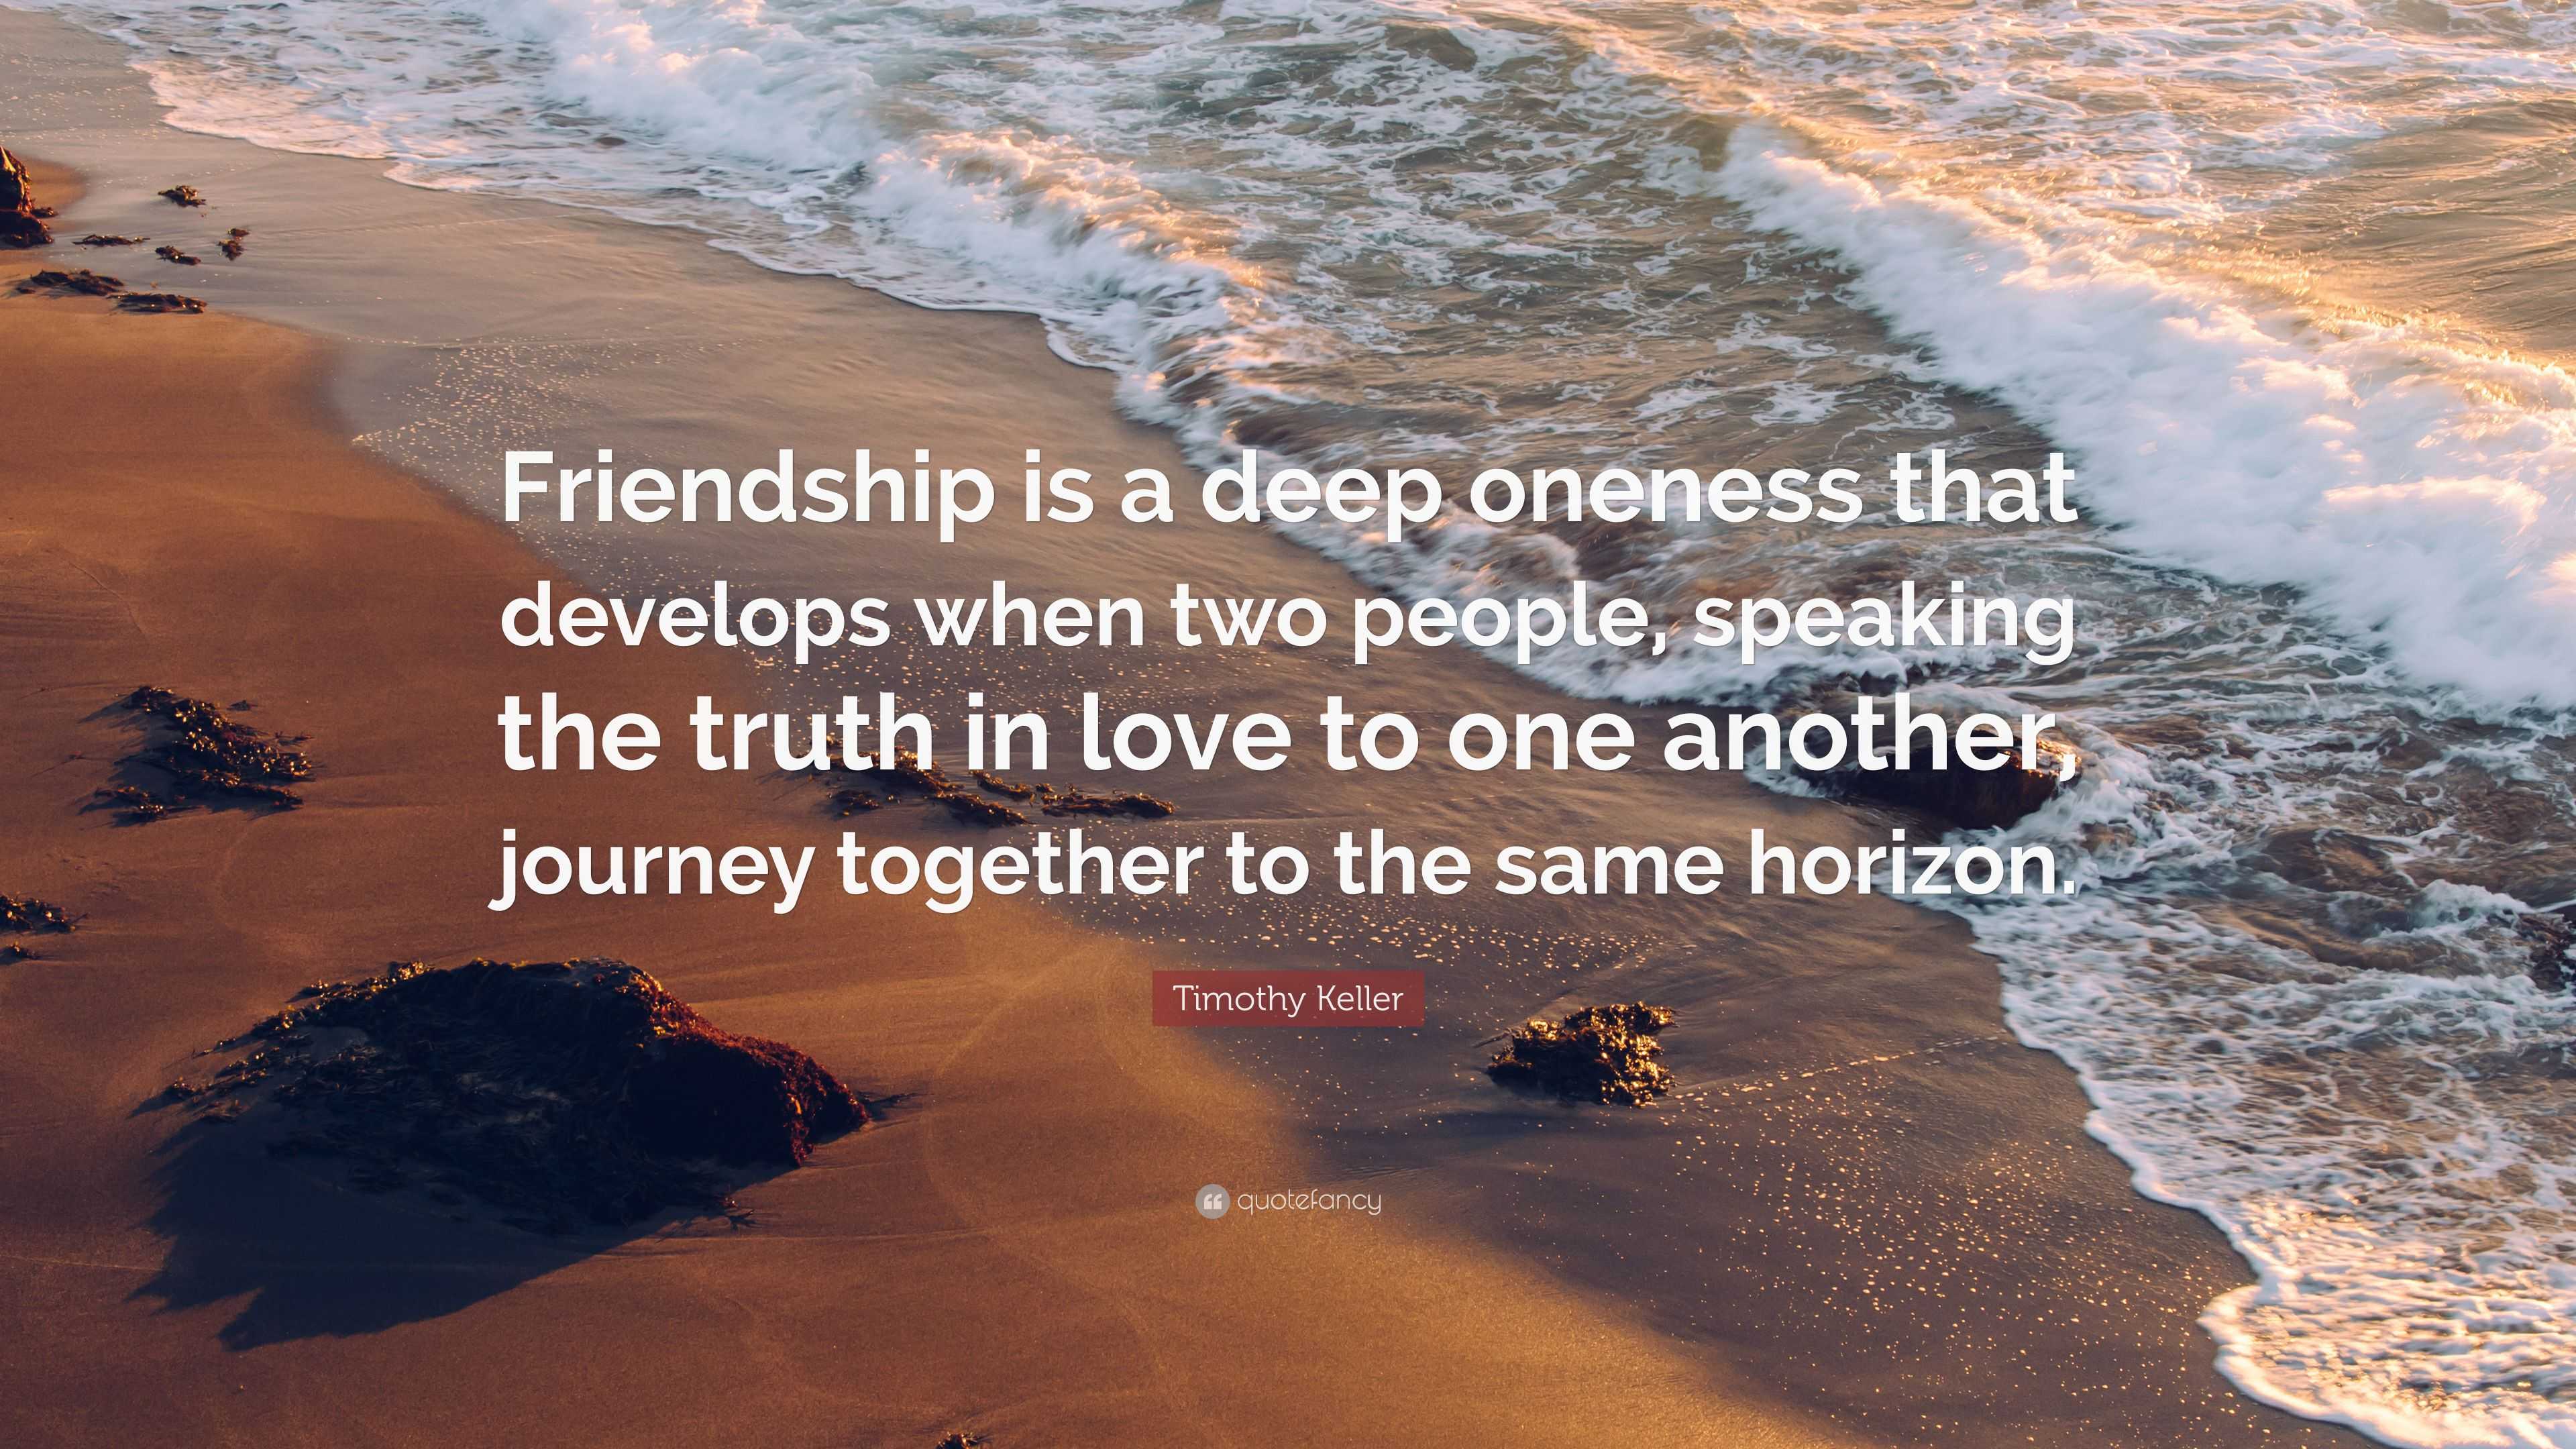 Timothy Keller Quote: “Friendship is a deep oneness that develops when ...